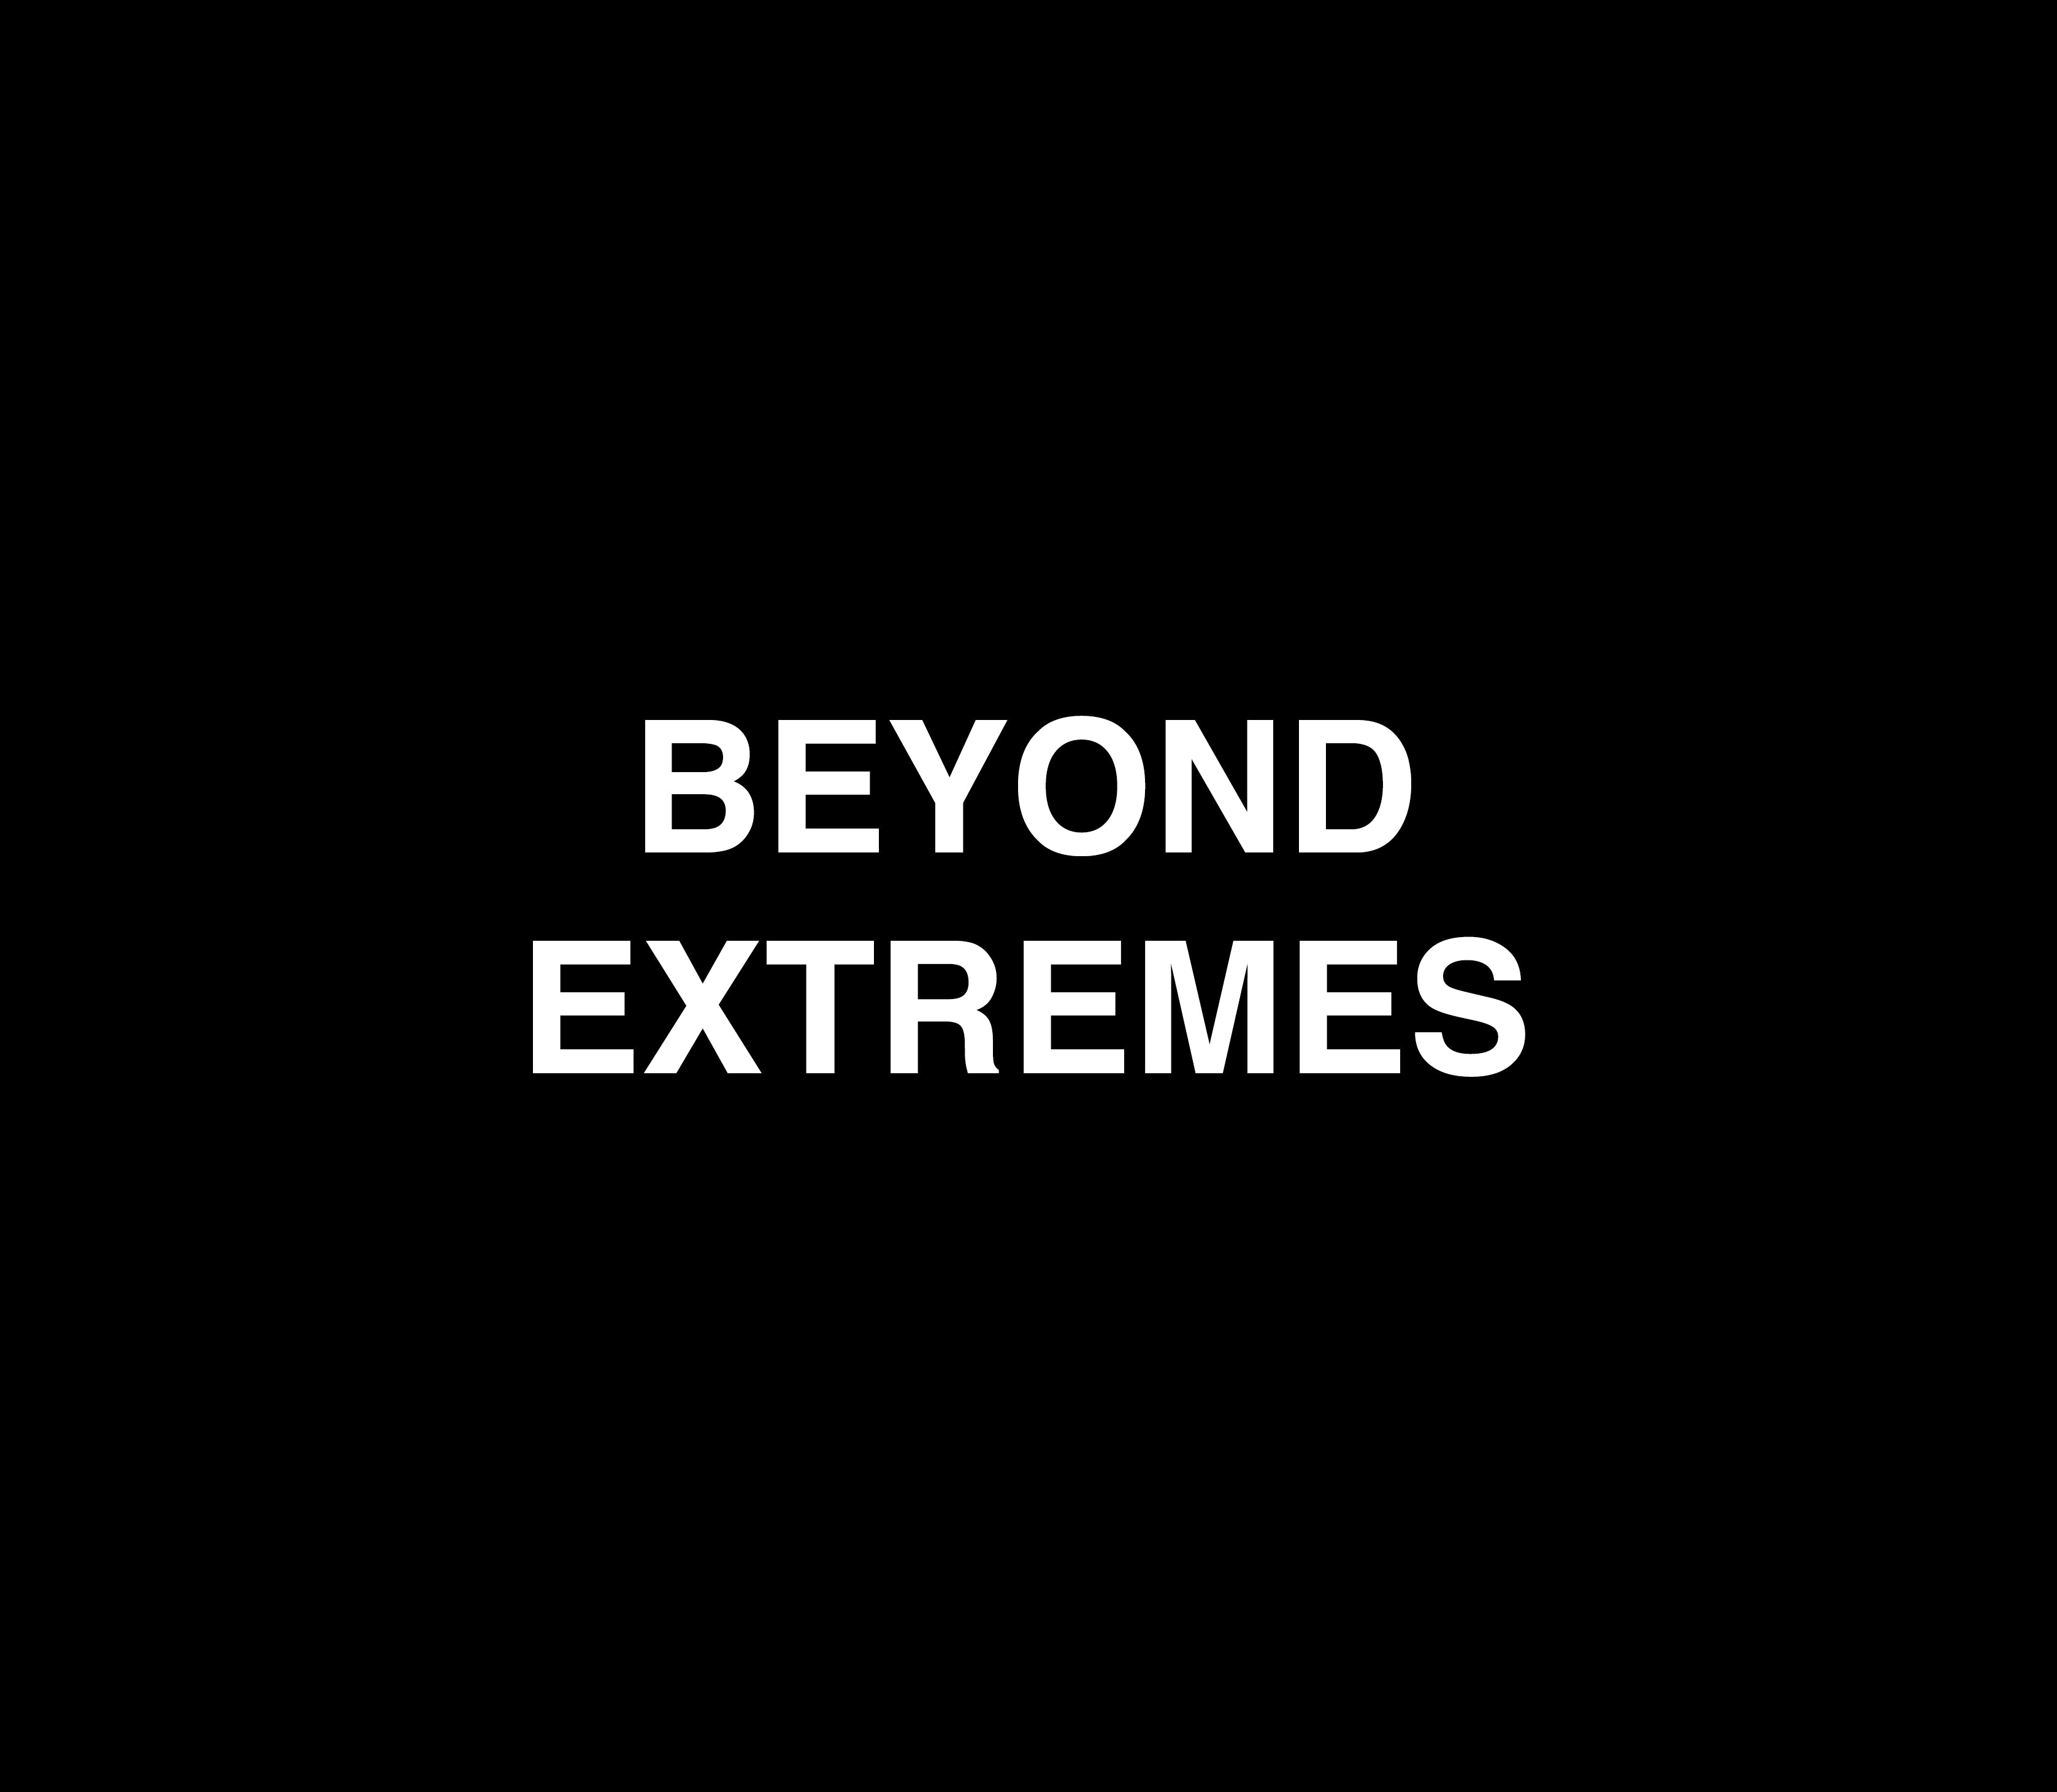 Beyond Extremes